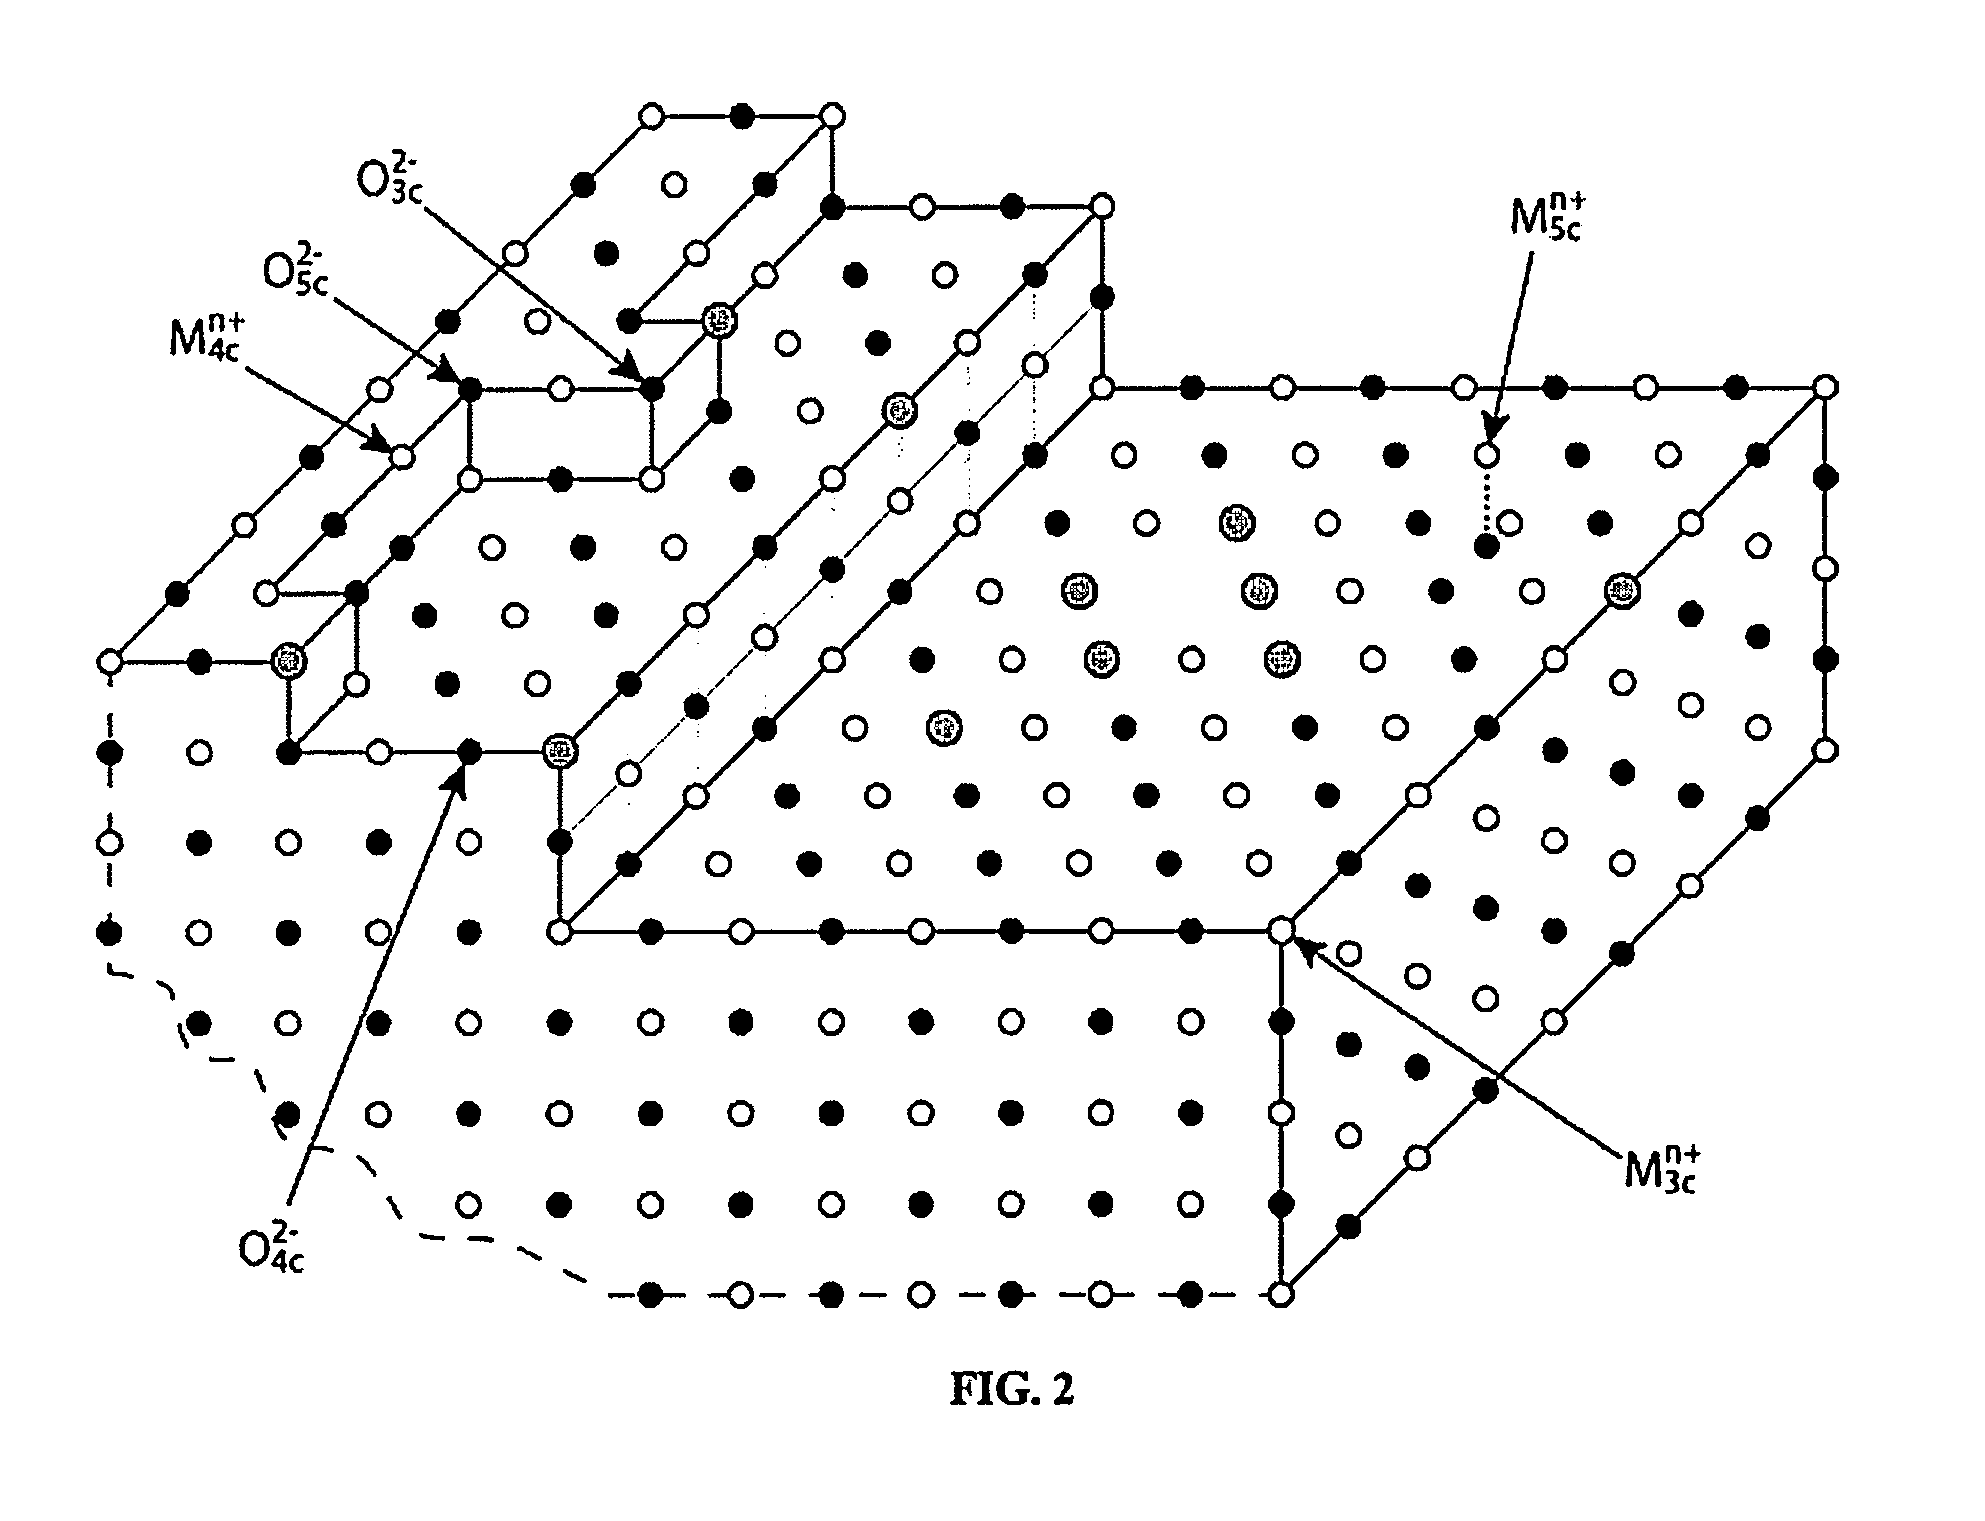 Multilayered mixed bed filter for the removal of toxic gases from air streams and methods thereof